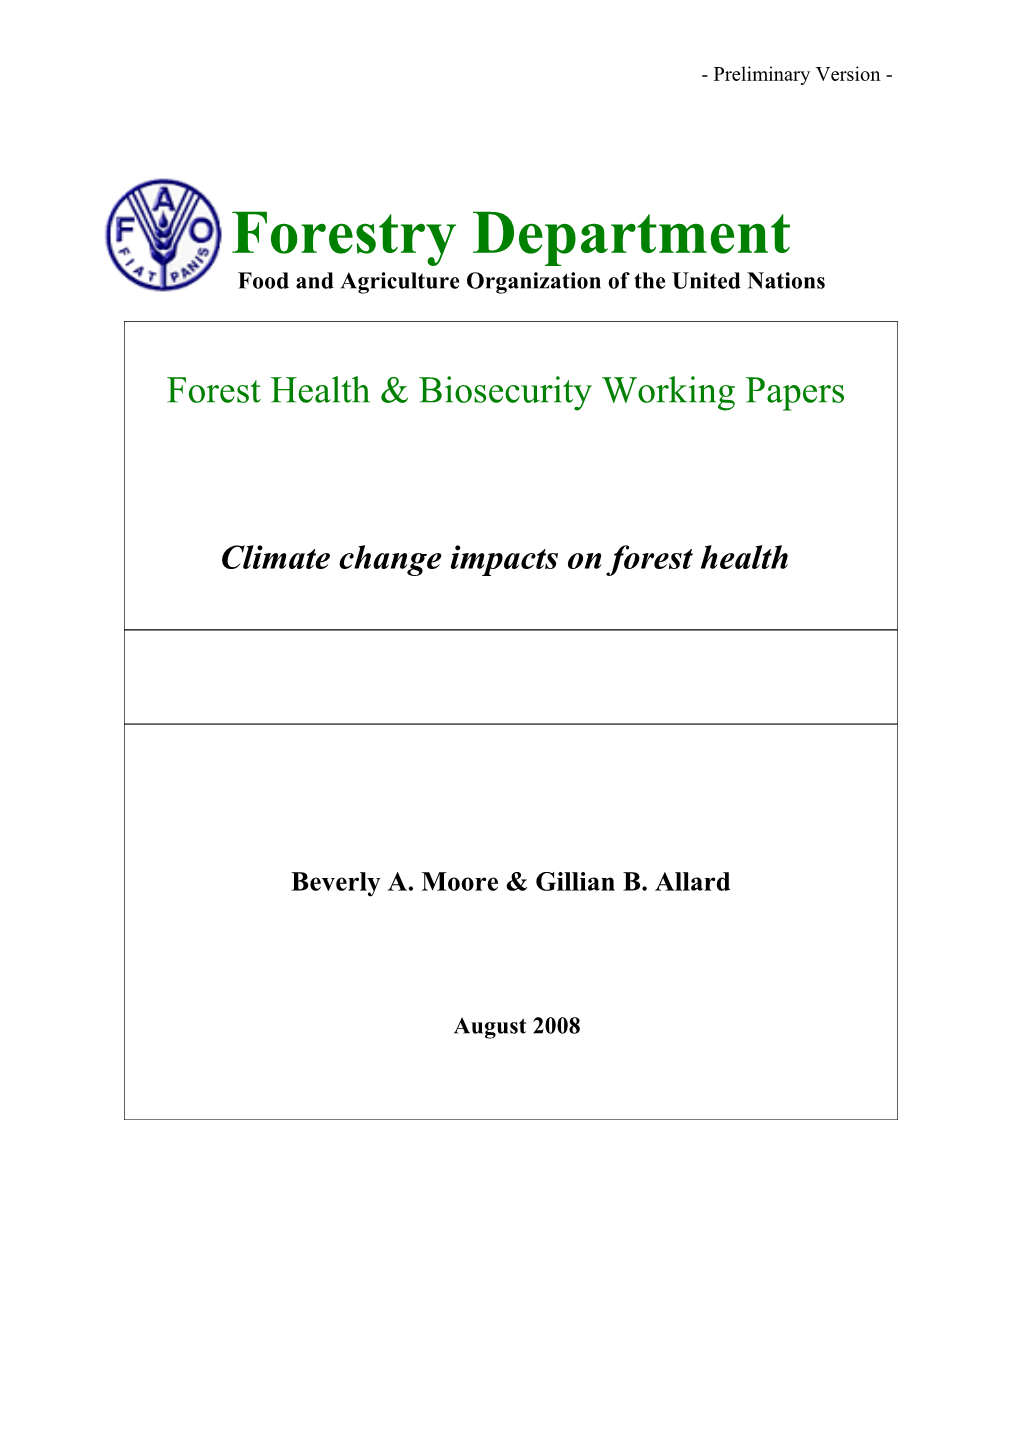 Climate Change Impacts on Forest Health: Insect Pests, Diseases and Invasive Alien Species